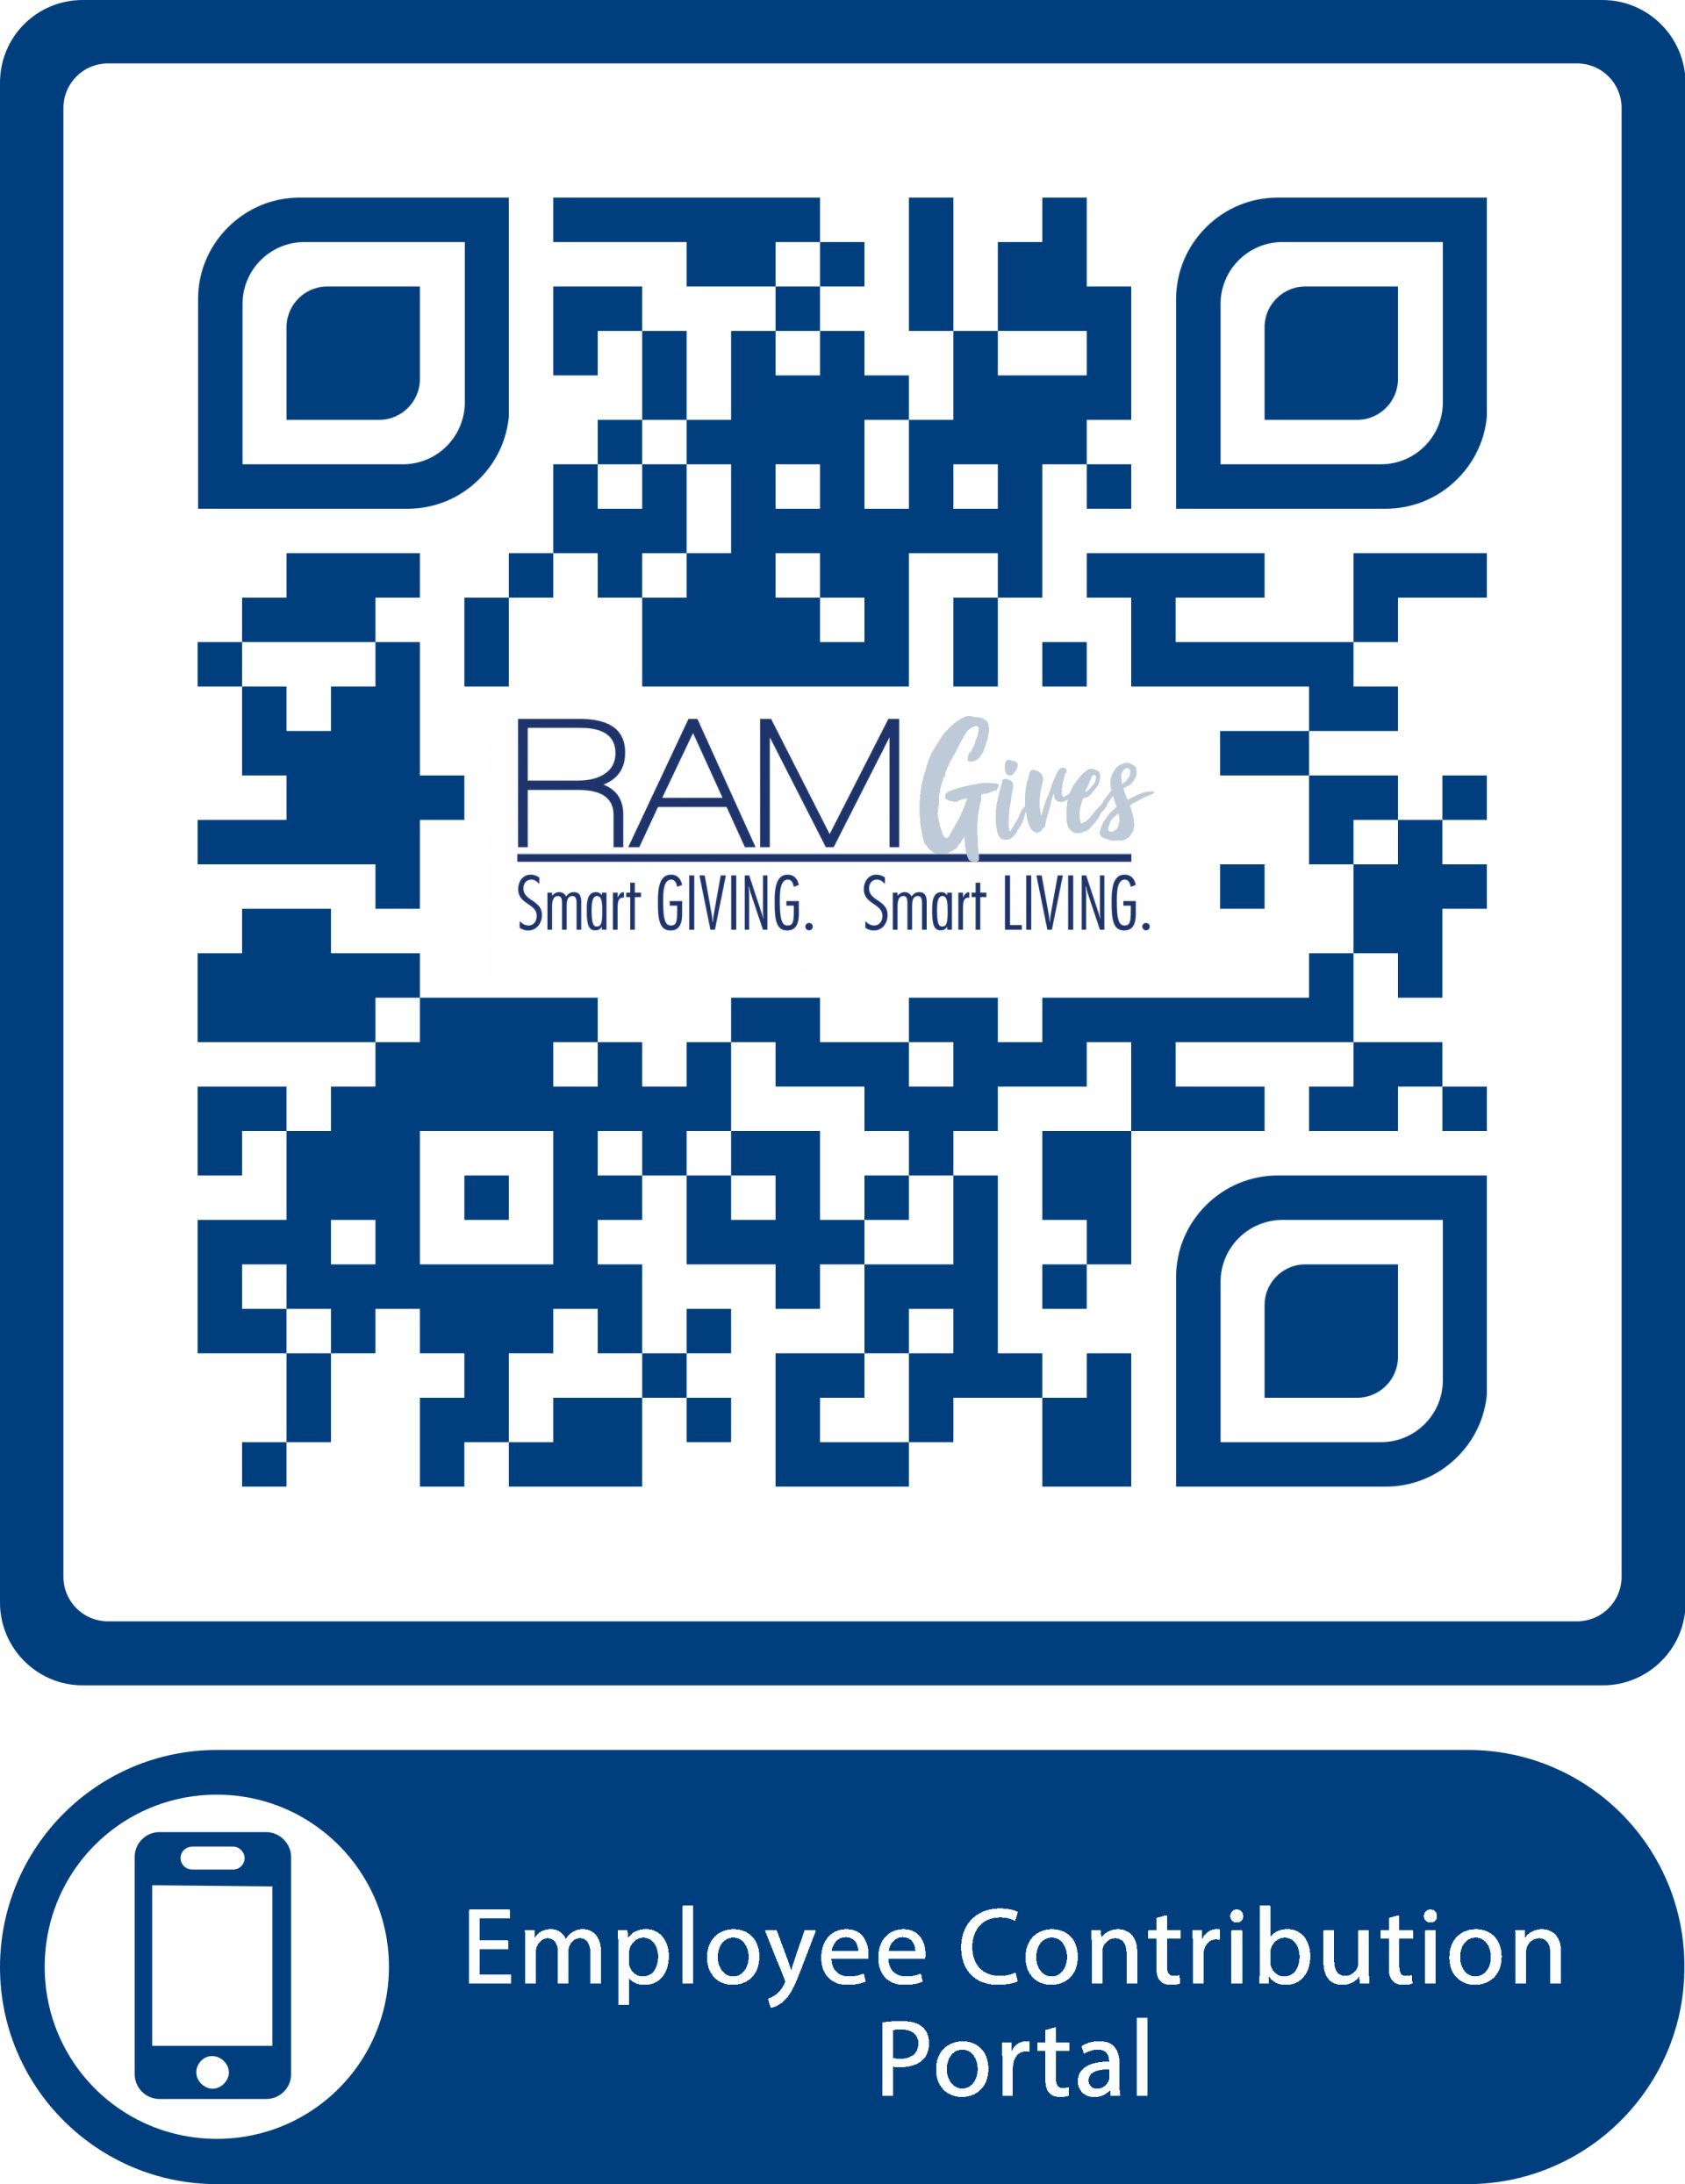 A qr code for the employee contribution portal